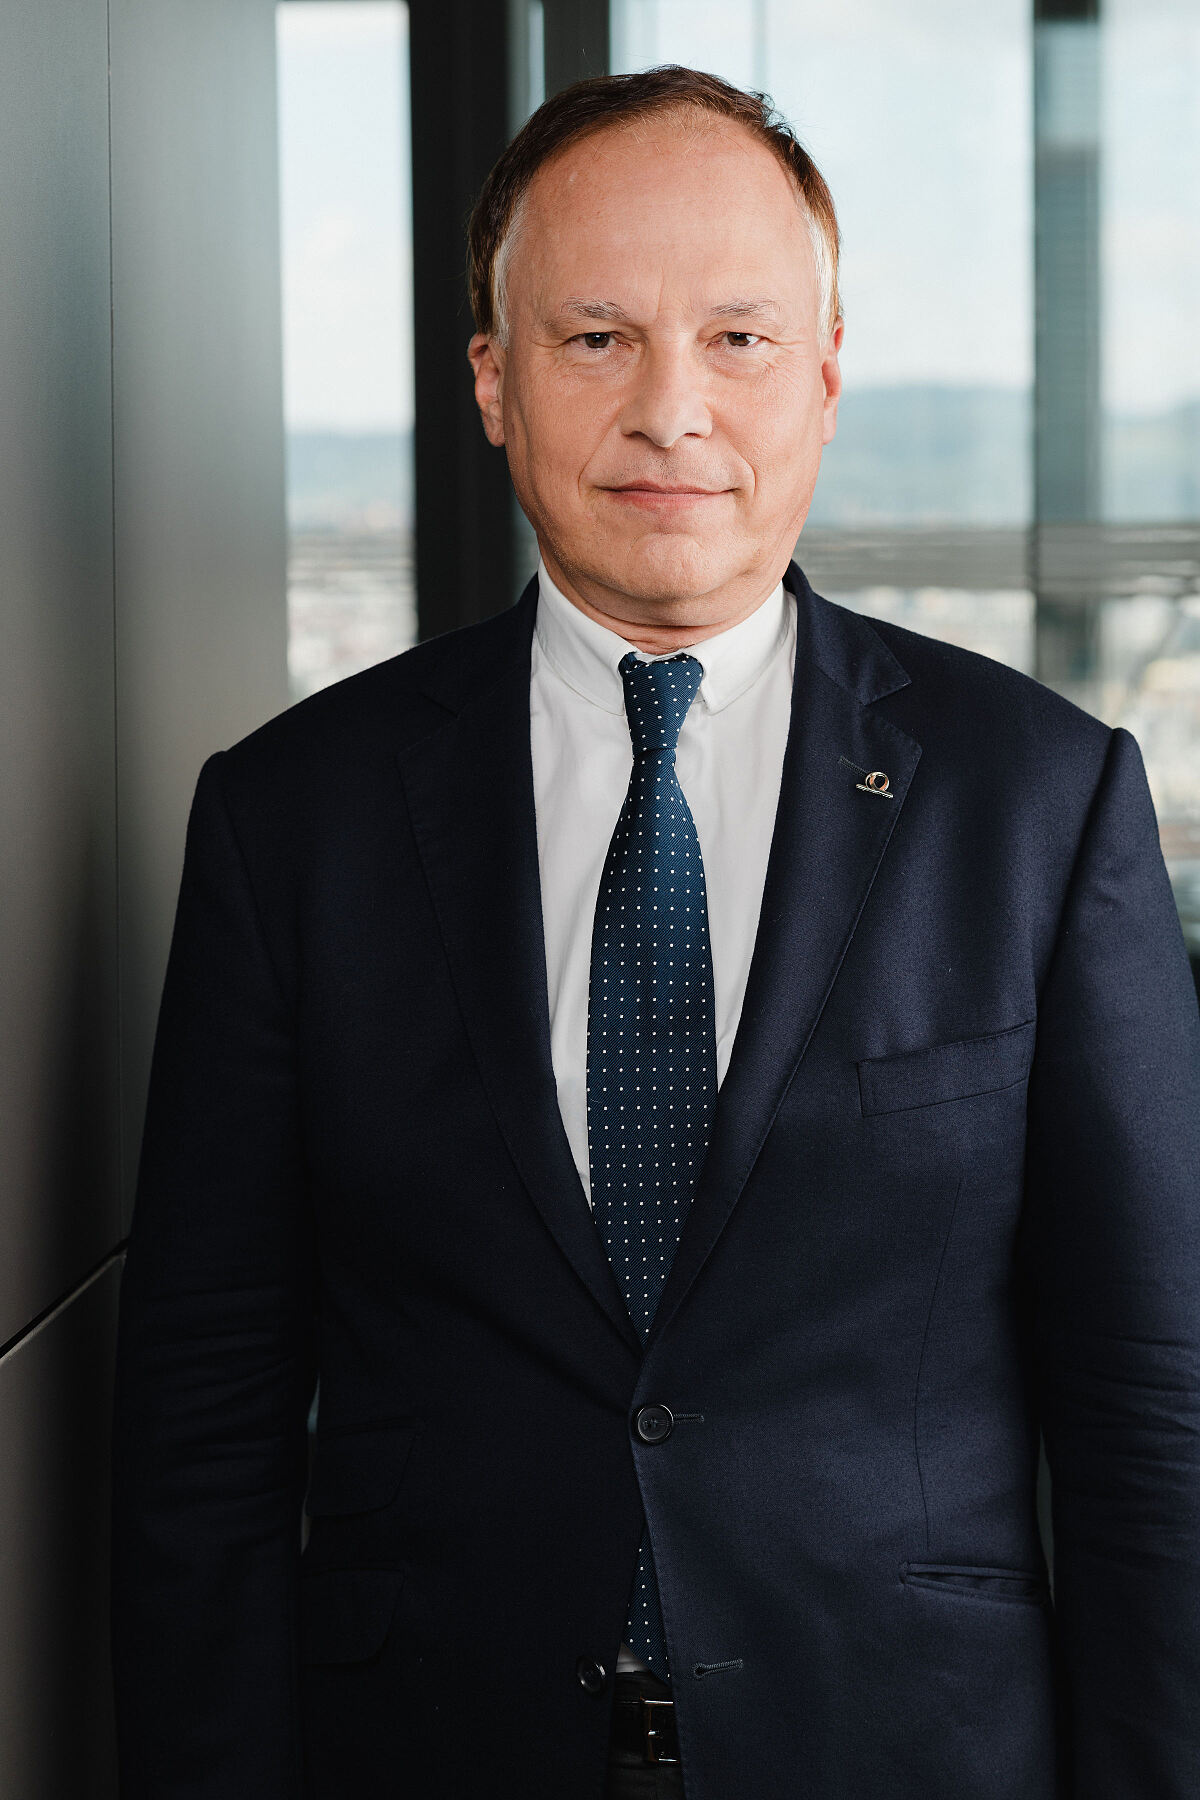 Peter Eichler, Member of the Board, UNIQA Insurance Group AG, UNIQA Österreich